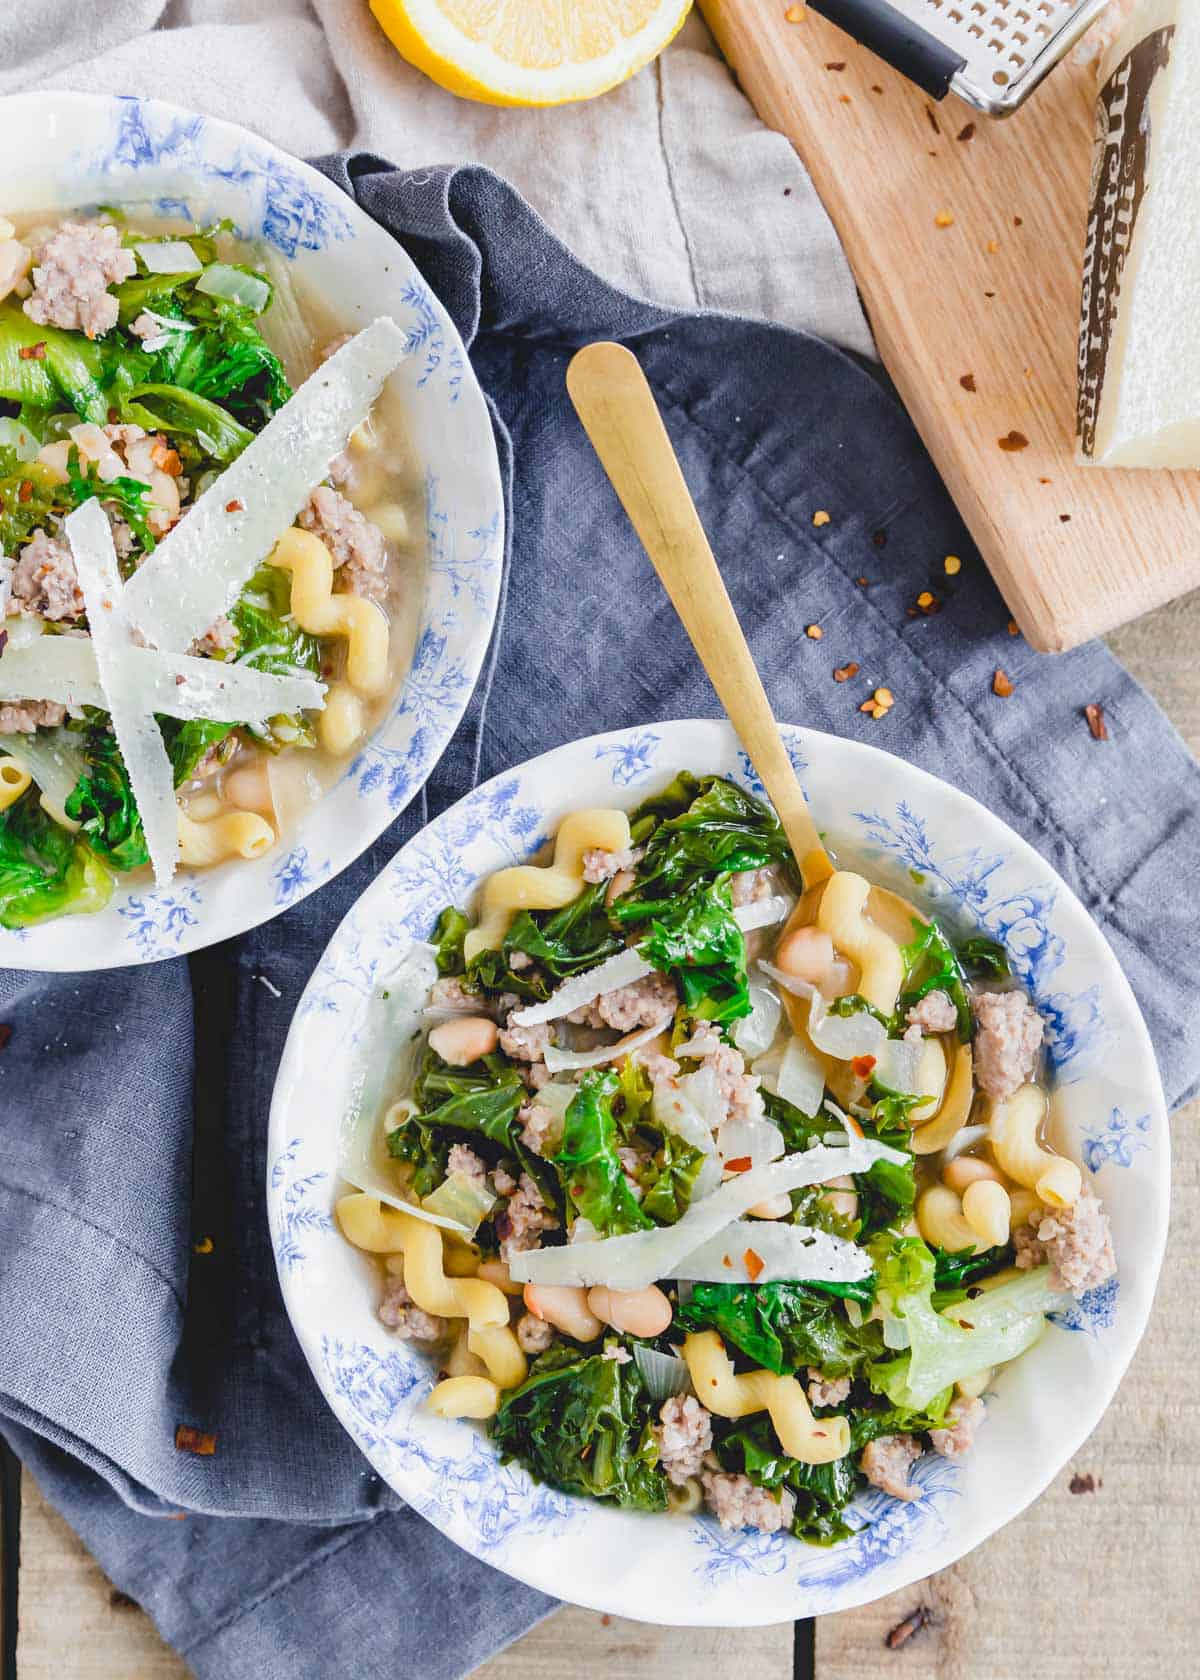 Soup with escarole greens, white beans, pork sausage and gluten-free pasta in bowls with spoons.